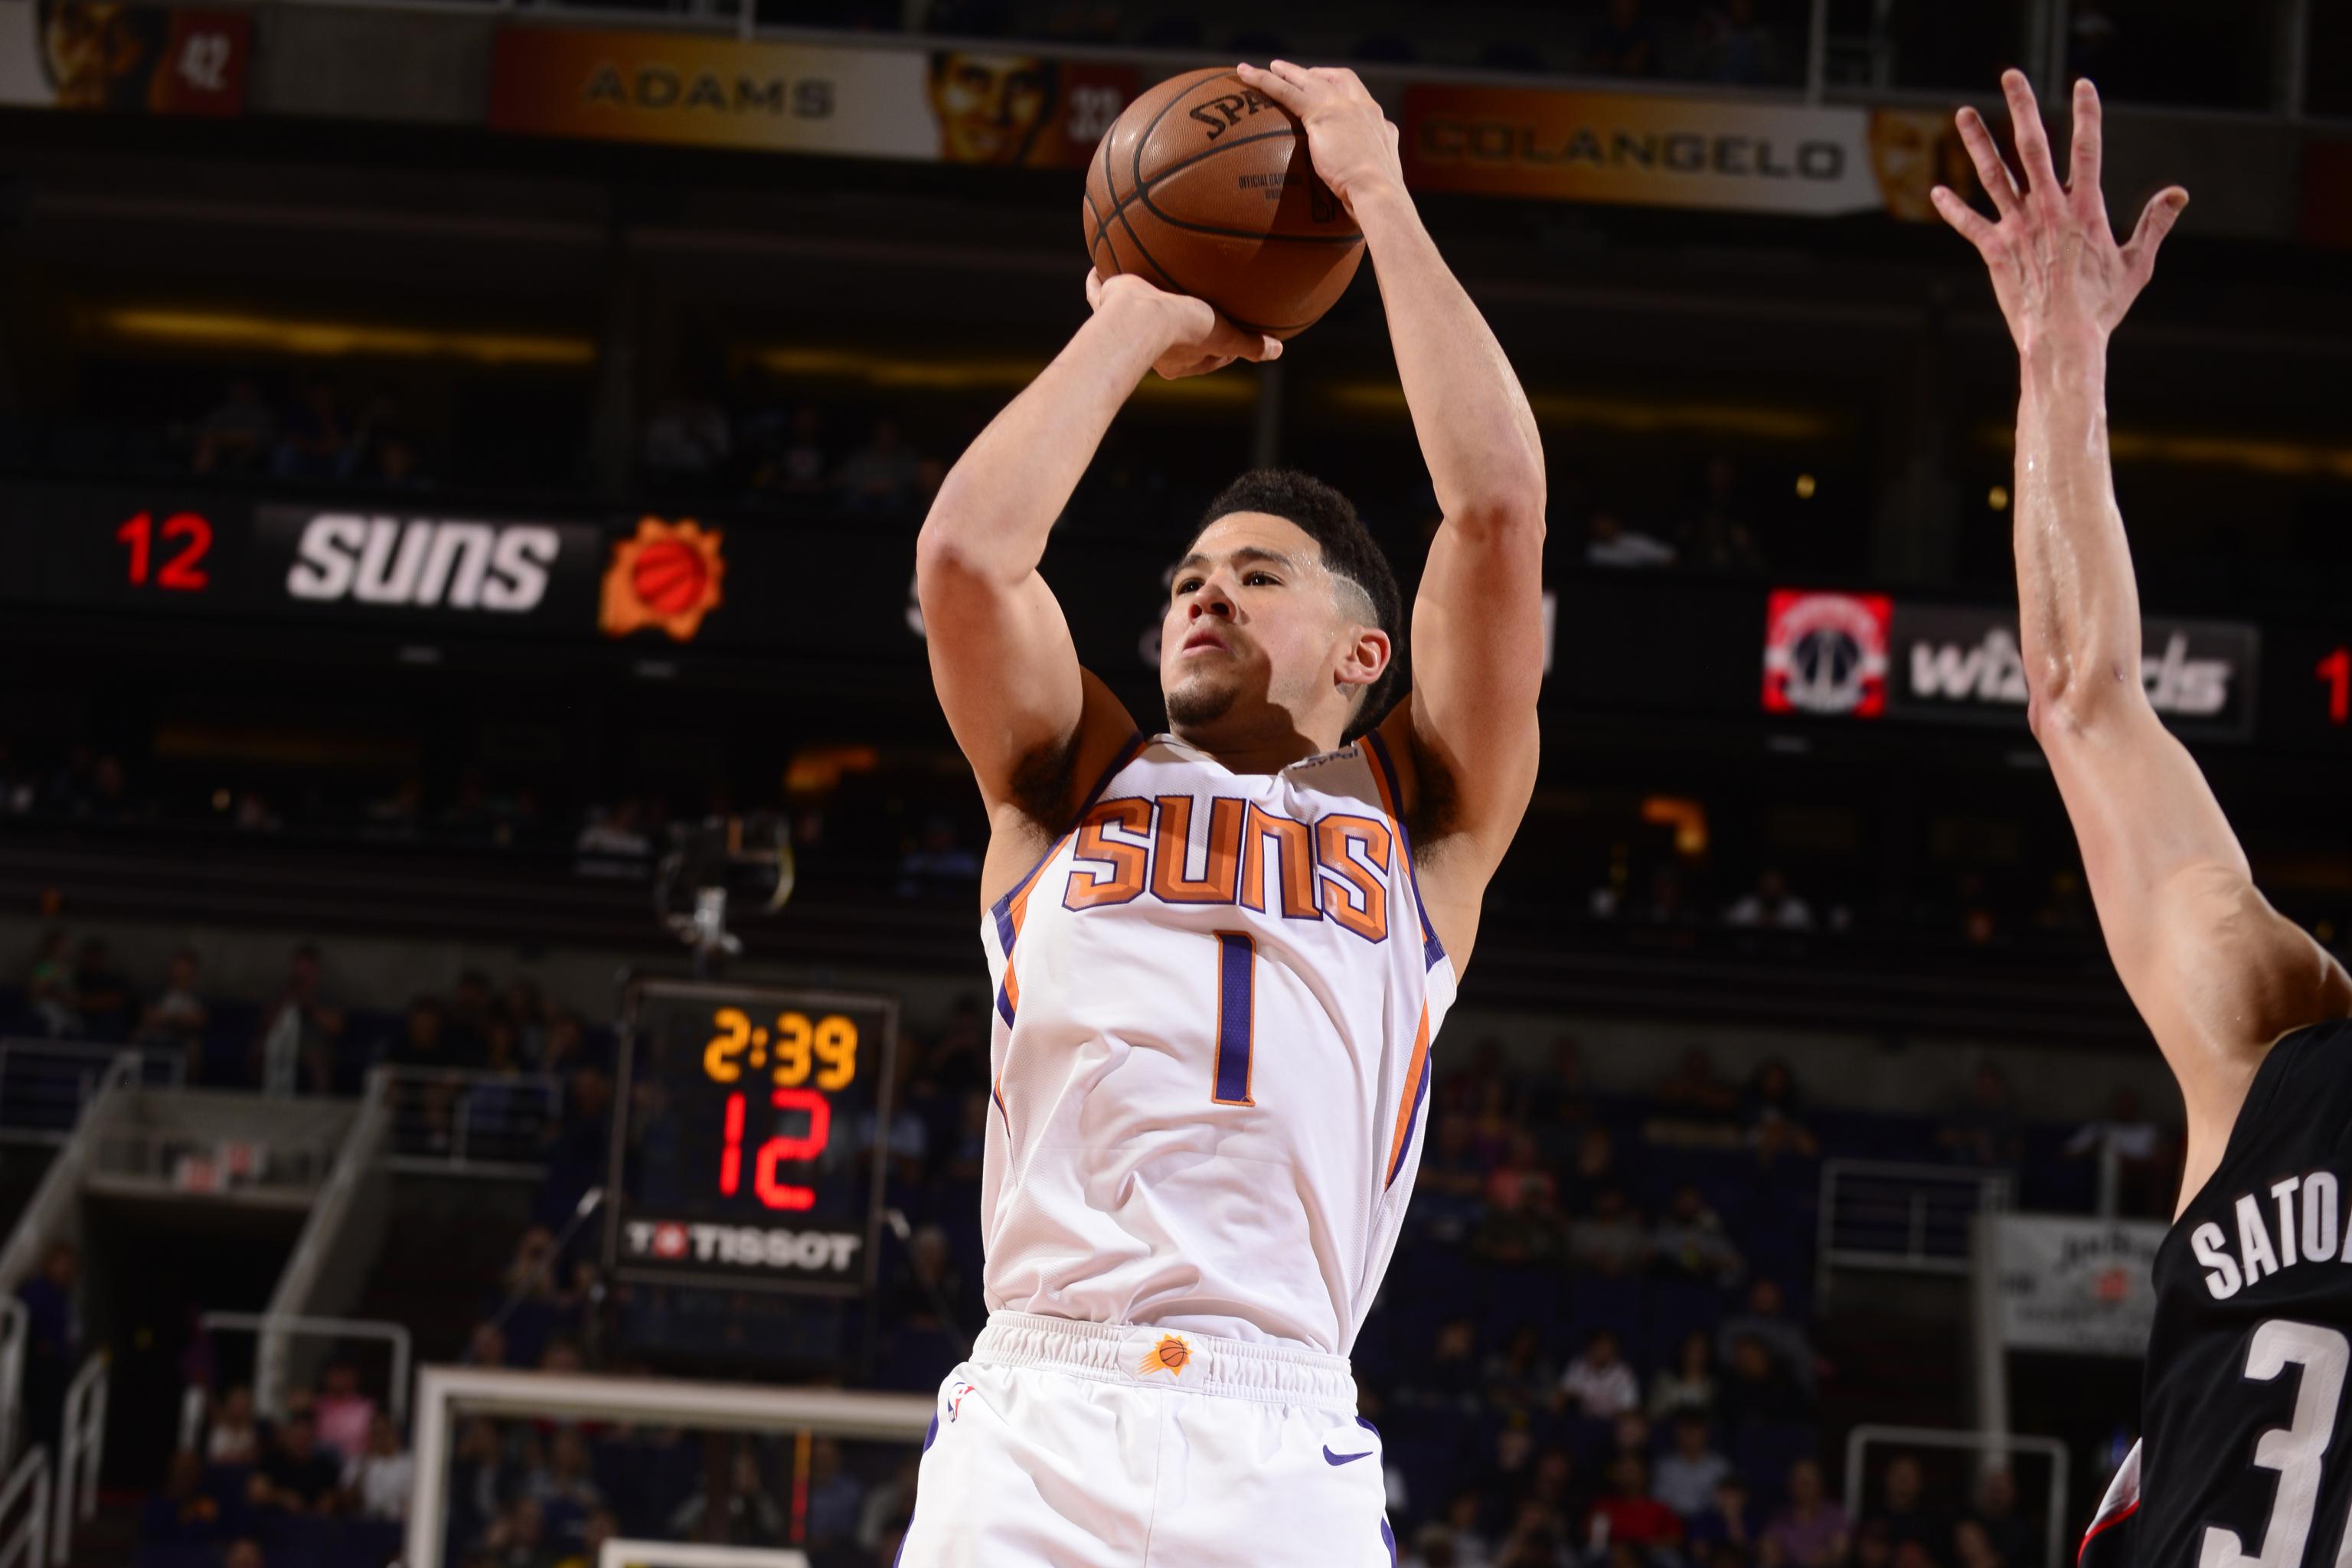 Video Watch Devin Booker Drop 50 Points For 2nd Consecutive Game Vs Wizards Bleacher Report Latest News Videos And Highlights